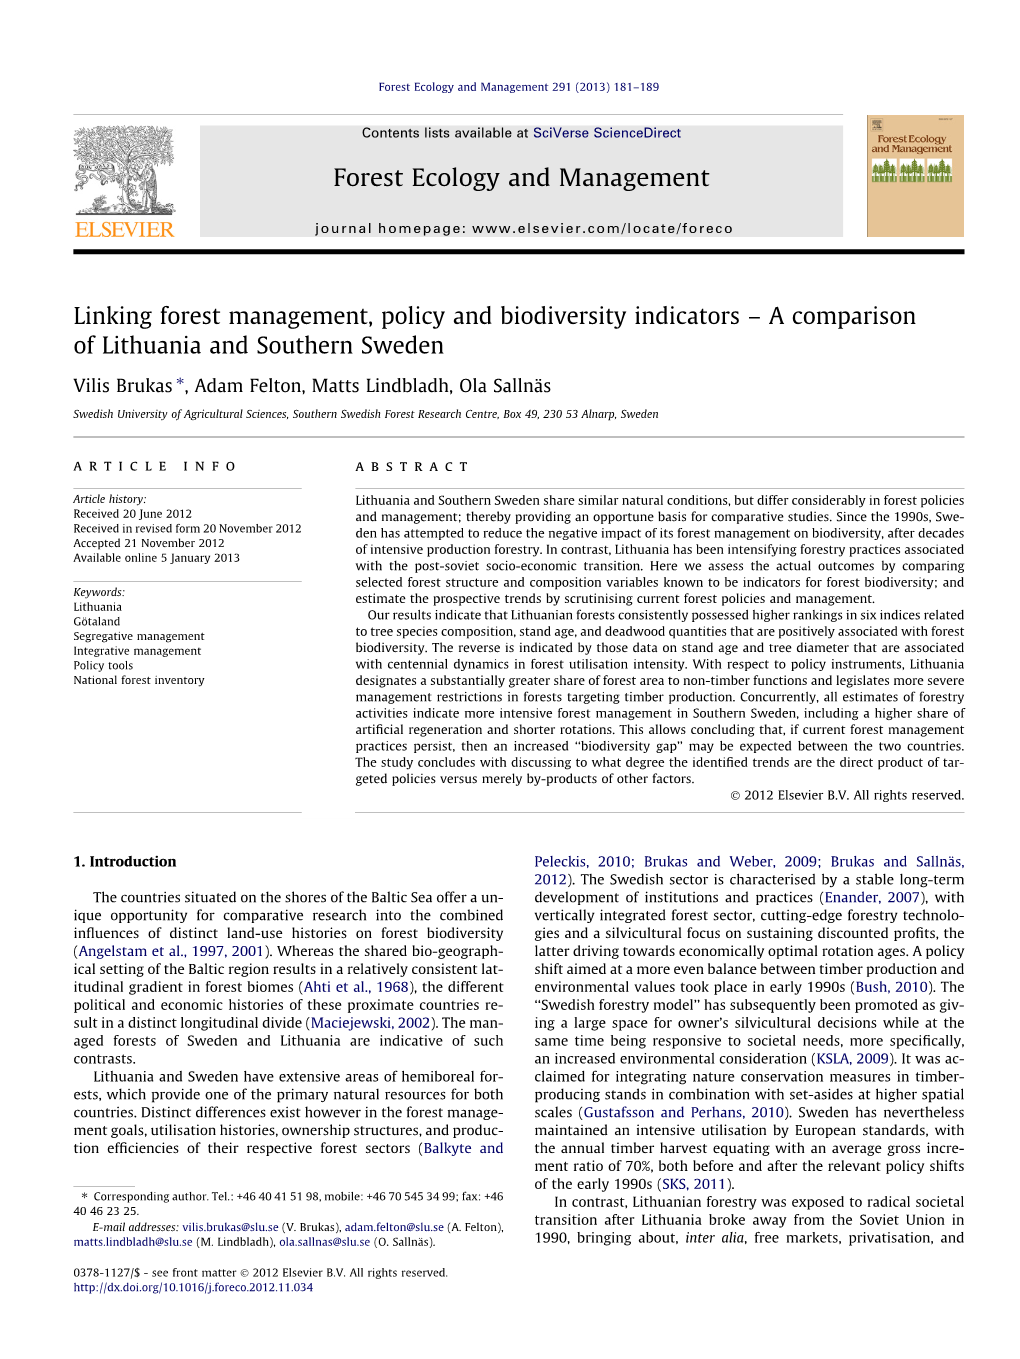 Linking Forest Management, Policy and Biodiversity Indicators Â